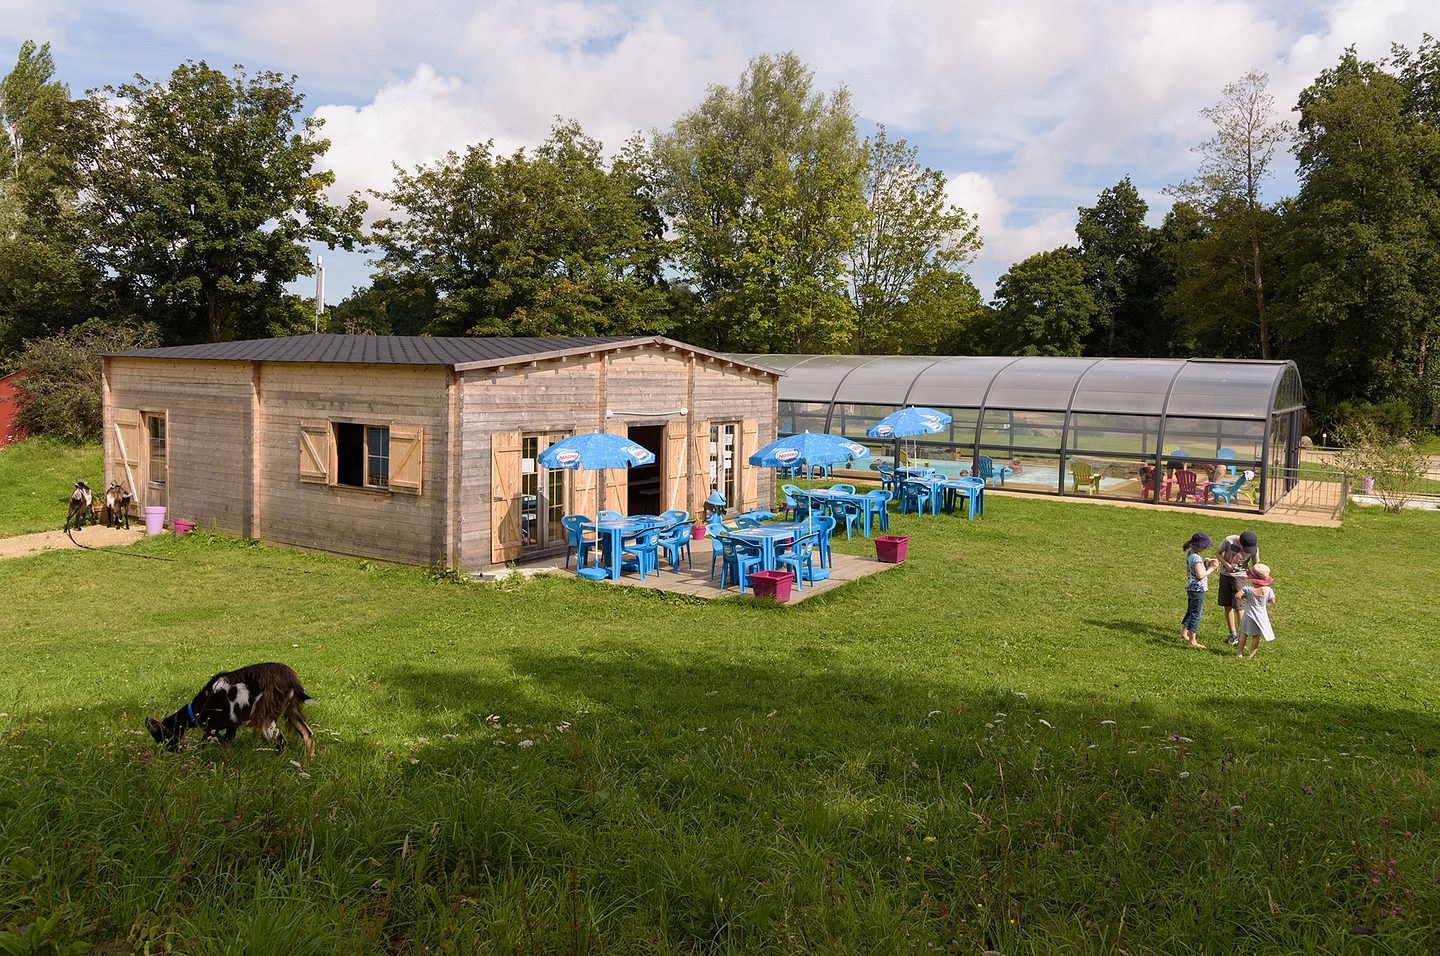 Summer sunshine, swimming pool and goats on the Domaine de Mesqueau campsite